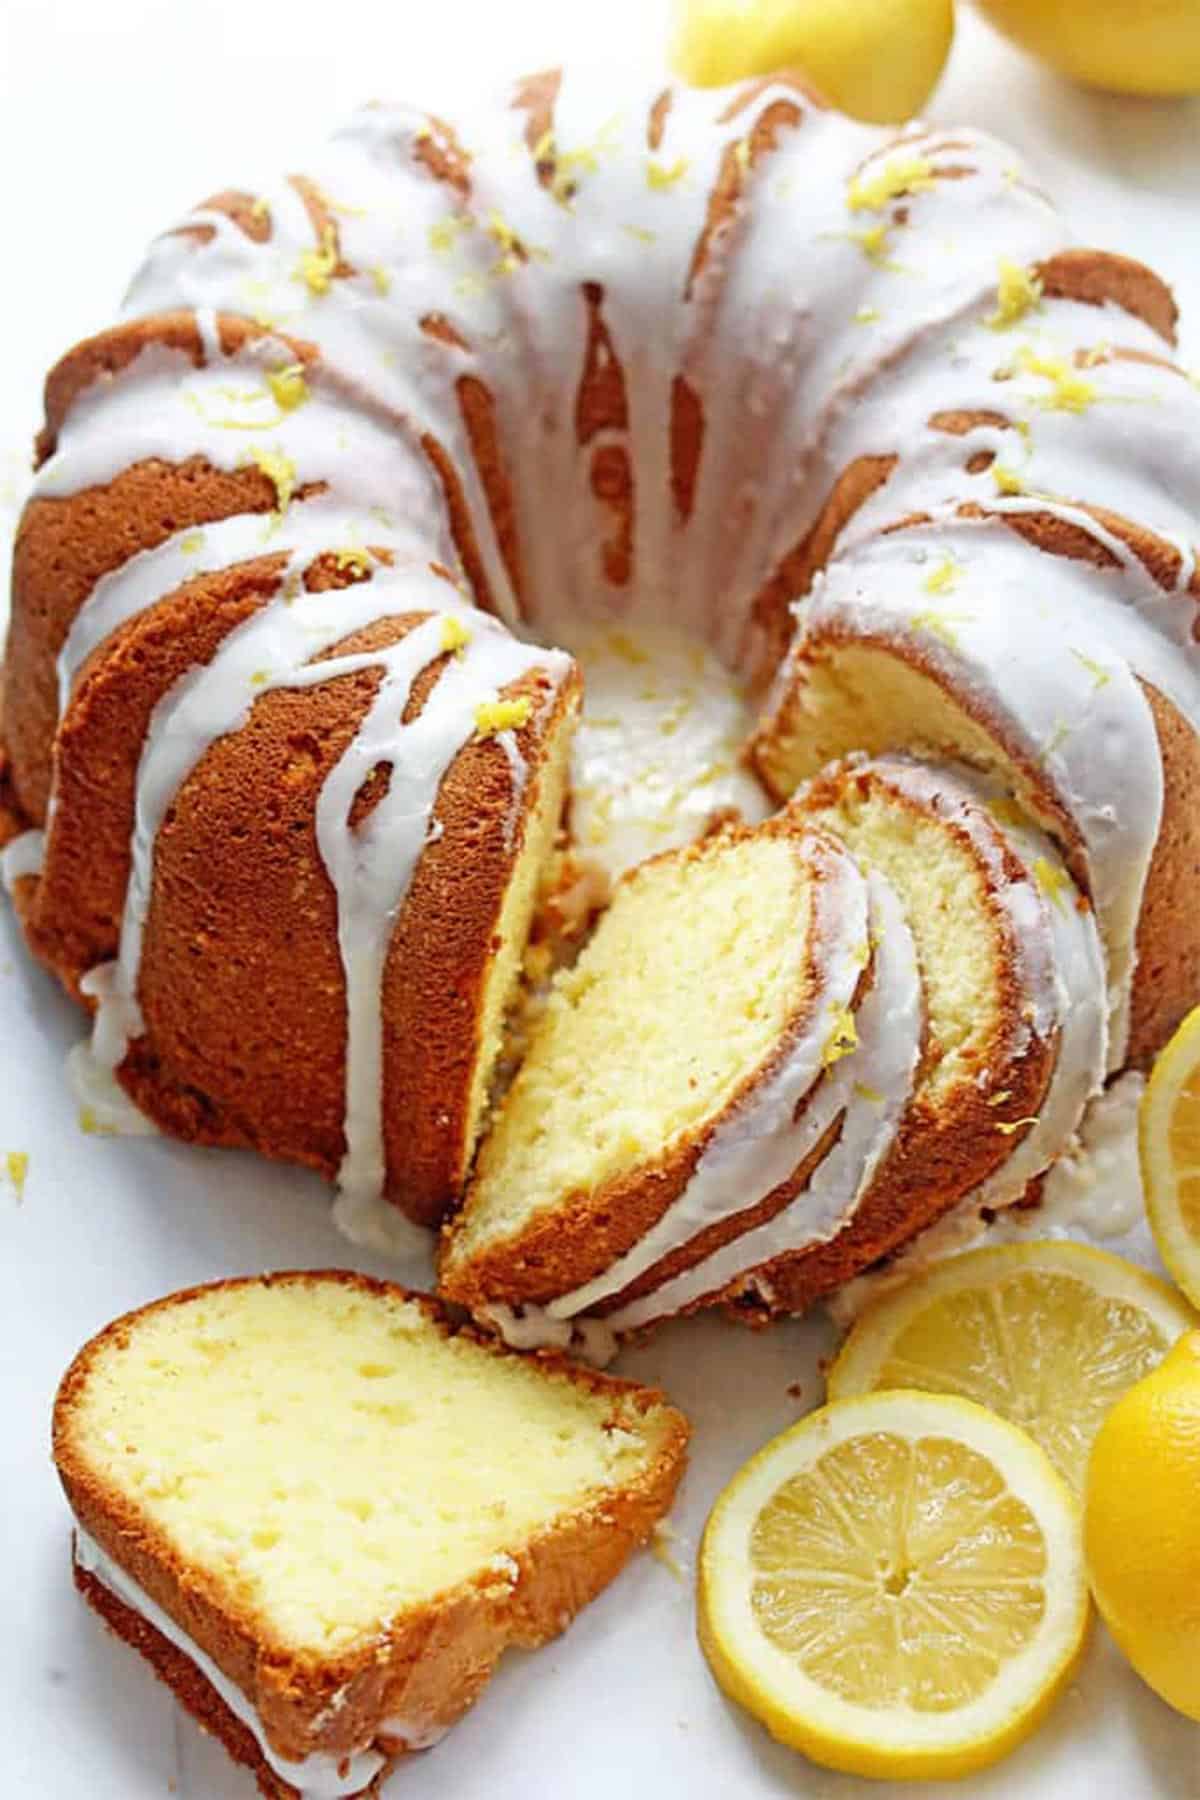 Lemon pound cake with a few slices cut and one flat in the front.